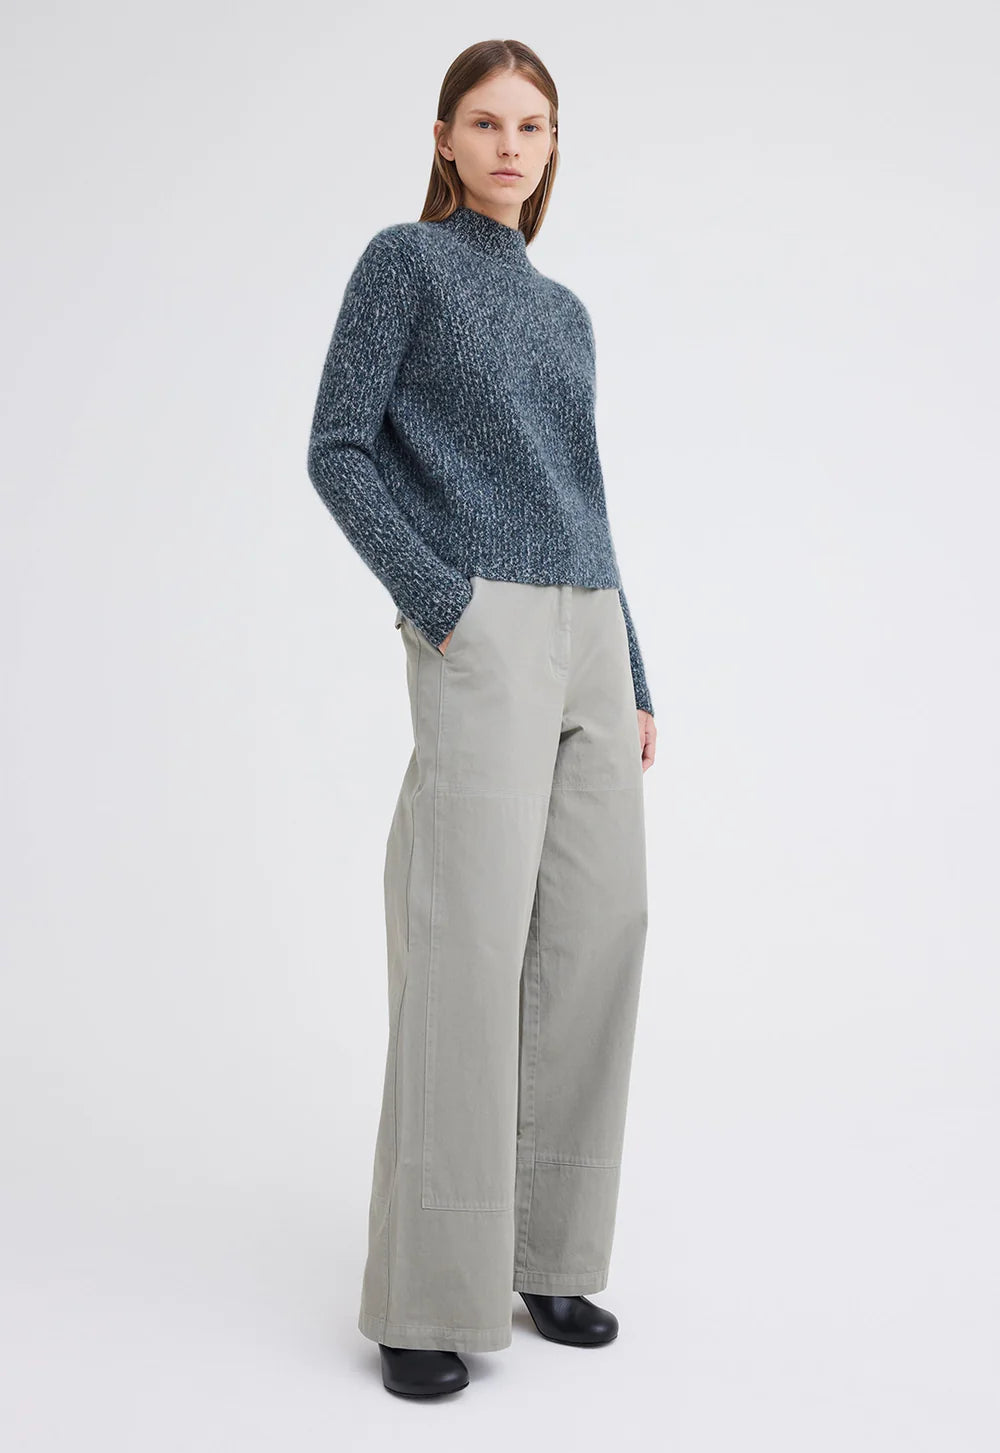 Lanny Cashmere Sweater in Flaxen / Char Marle / Bavaria